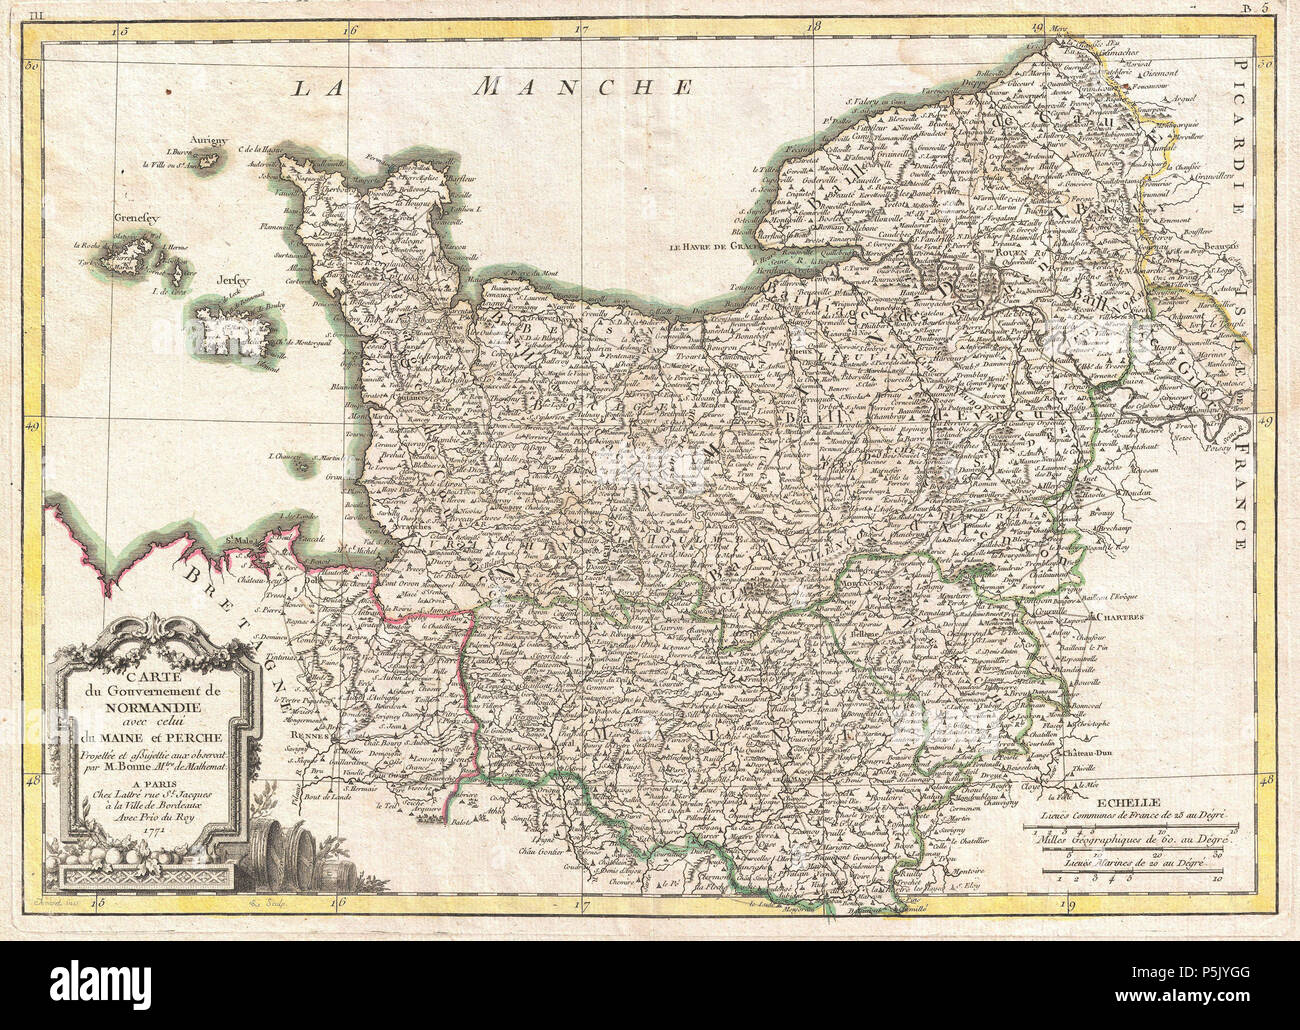 Carte du Gouvernement de Normandie avec celui du Maine et Perche.  English: A beautiful example of Rigobert Bonne's 1771 decorative map of Normandy, France. Covers from Bretagne eastward as far as Picardie. Includes the Channel Islands of Guernsey and Jersey. A decorative title cartouche appears in the lower left quadrant. Drawn R. Bonne c. 1771 for issue as plate no. 4 in Jean Lattre's 1776 issue of the Atlas Moderne . . 1771 (dated). N/A 24 1771 Bonne Map of Normandy, France - Geographicus - Normandie-bonne-1771 Stock Photo